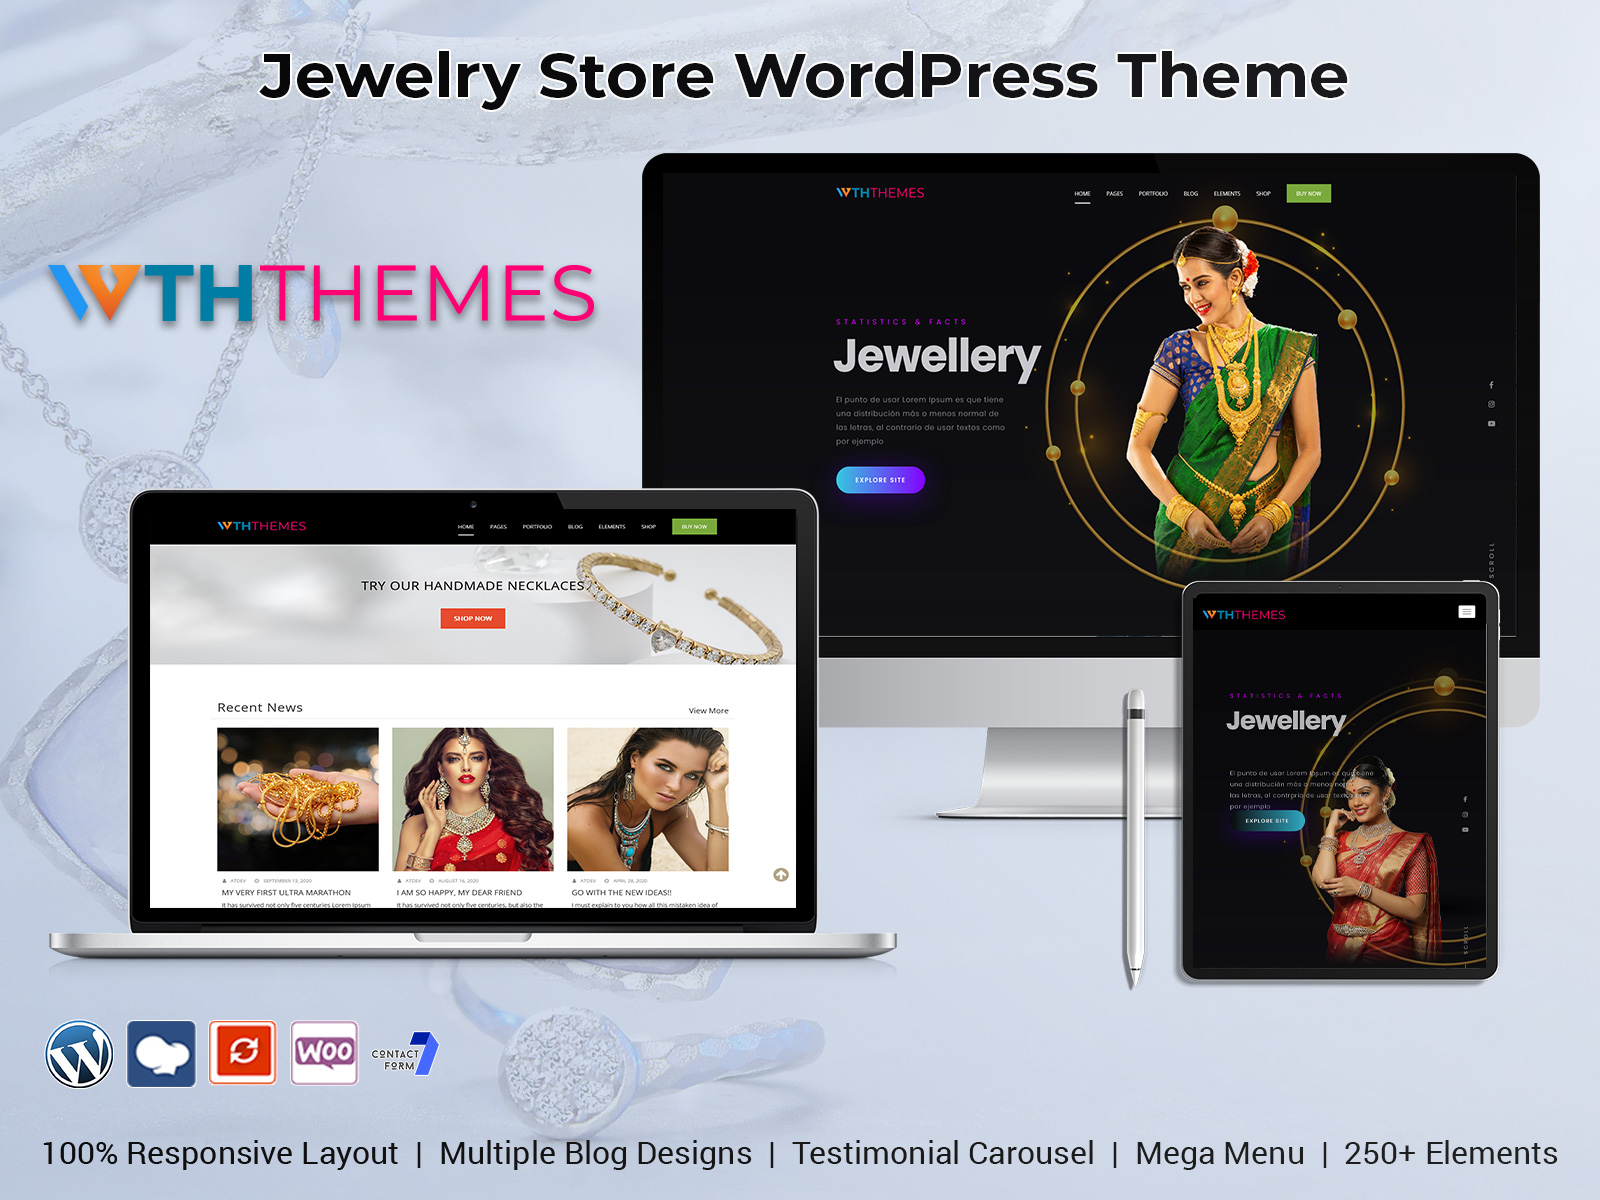 Boost Your Online Sales With A Jewelry WordPress Theme